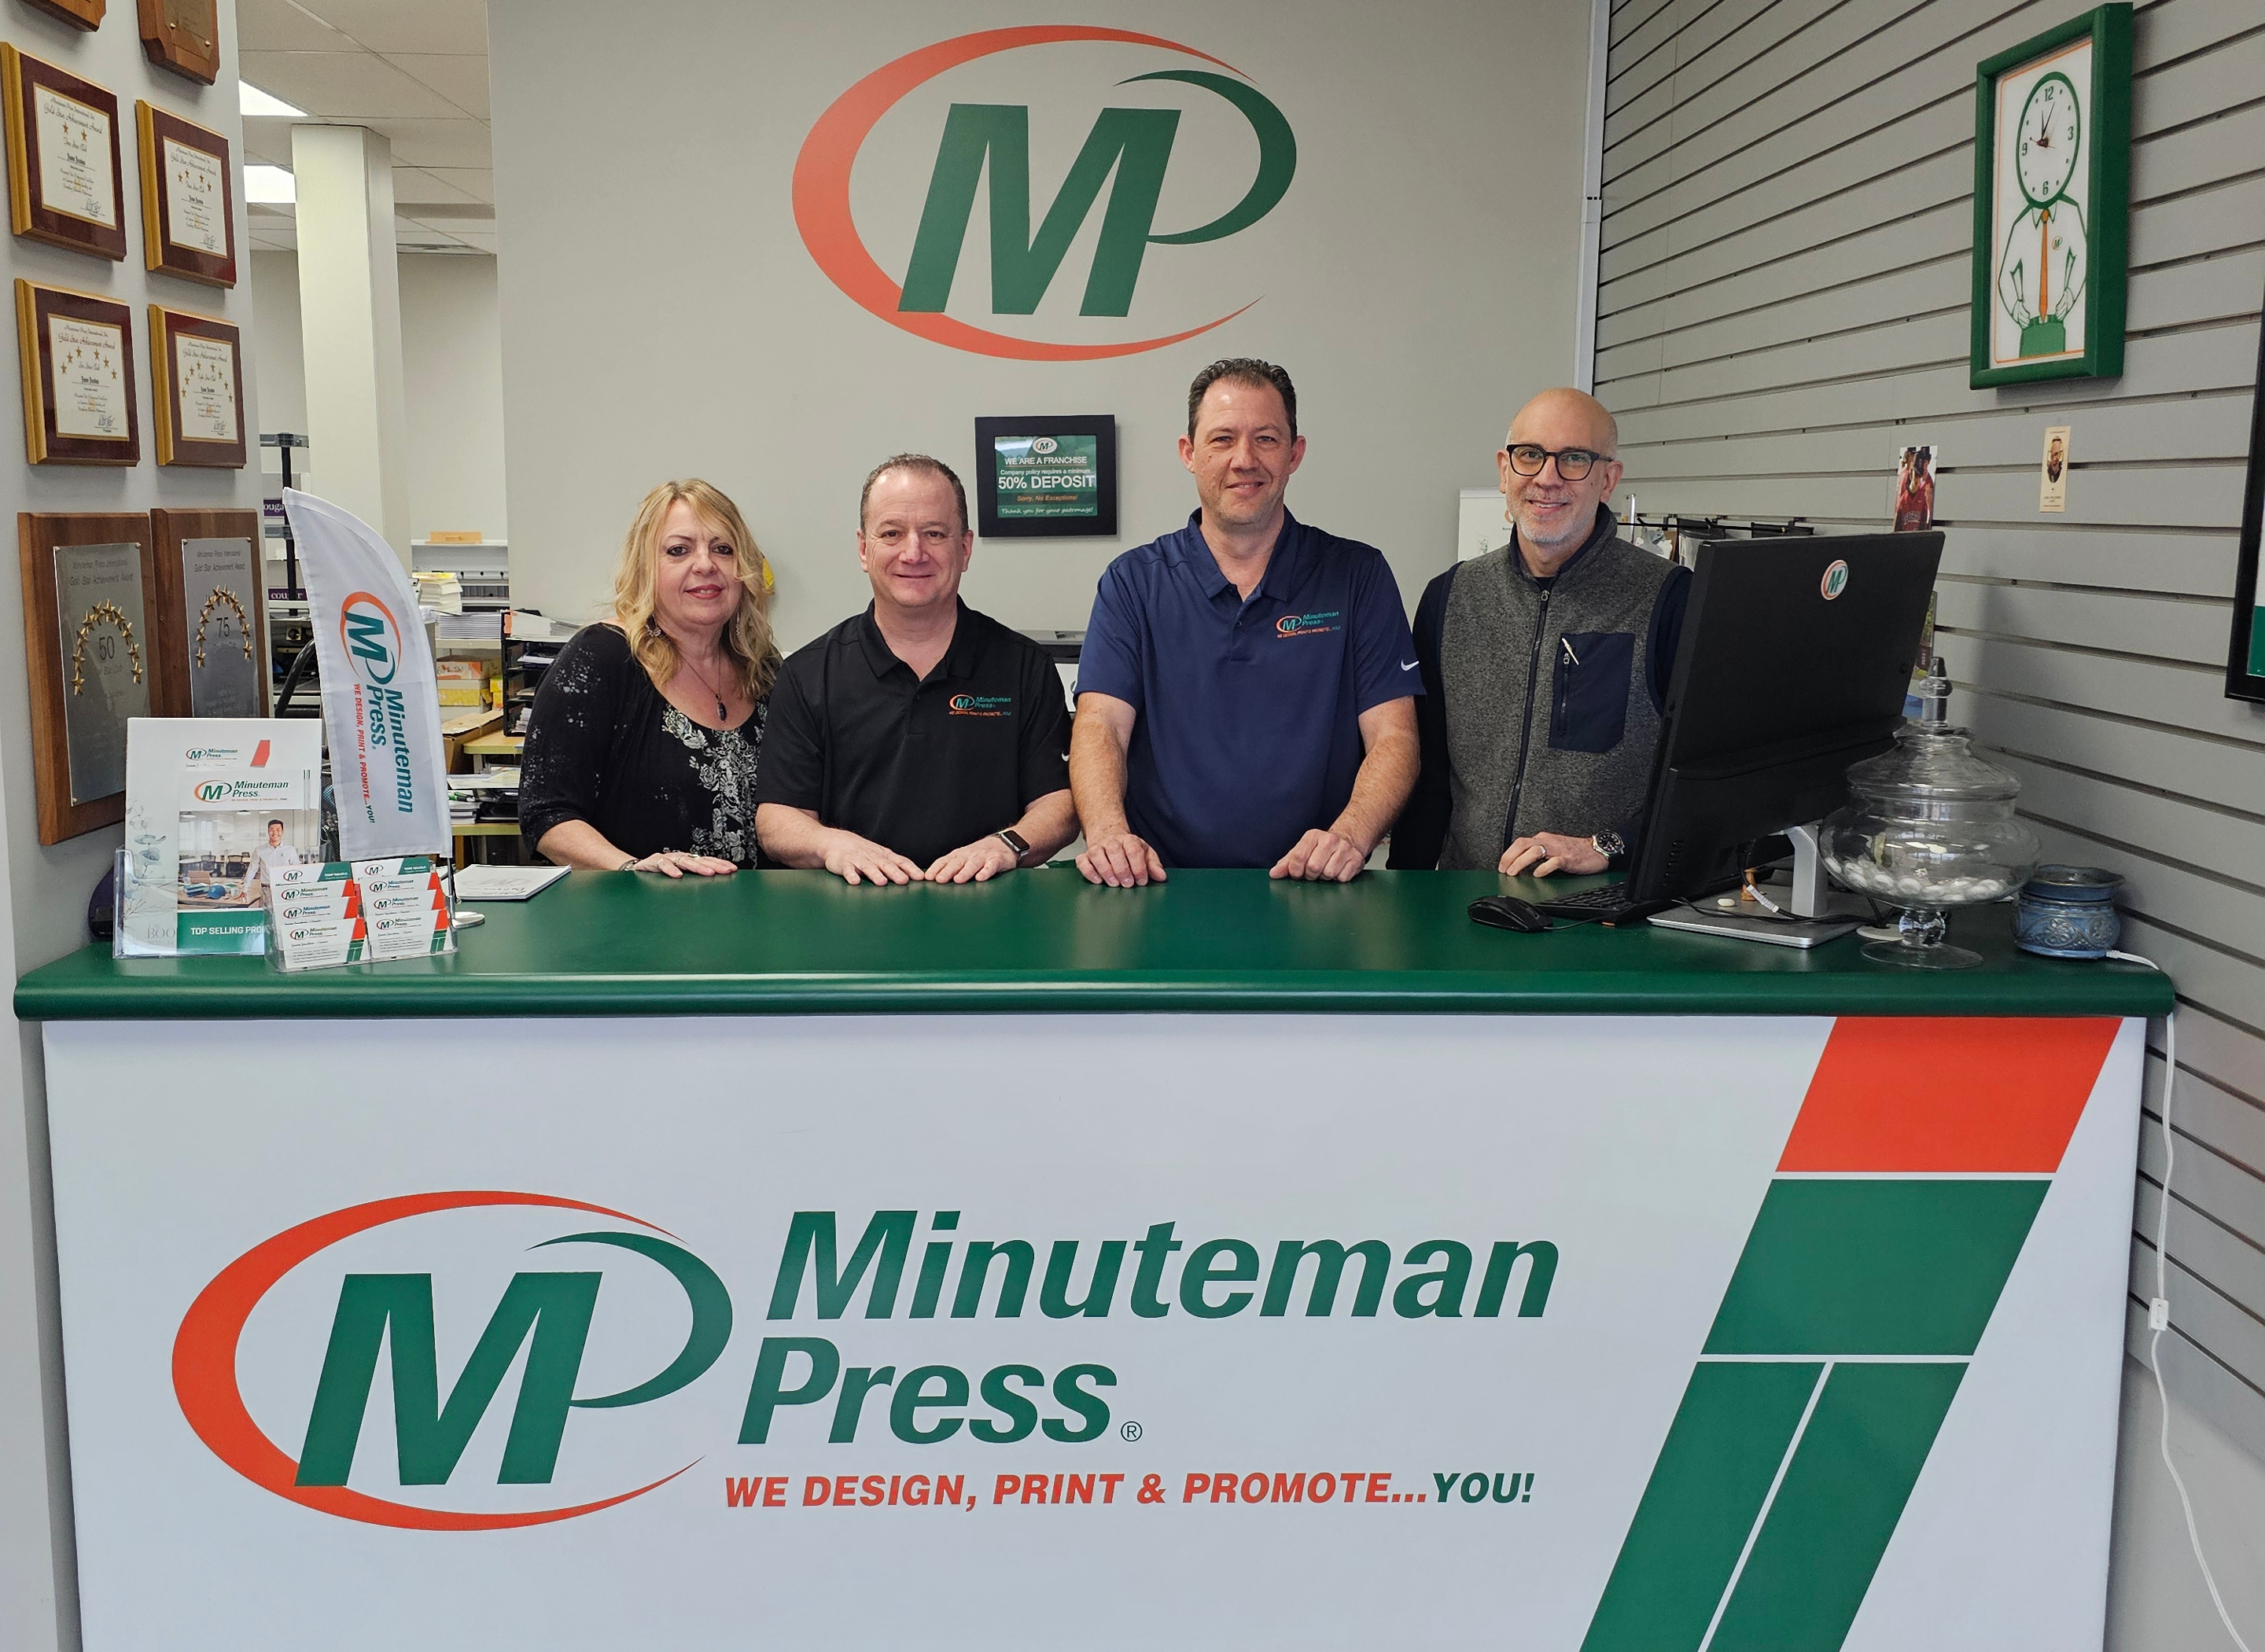 <div>Minuteman Press in Flemington, NJ & Printech Announce Merger Bringing Together Over 60 Years of Local Printing & Client Experience</div>